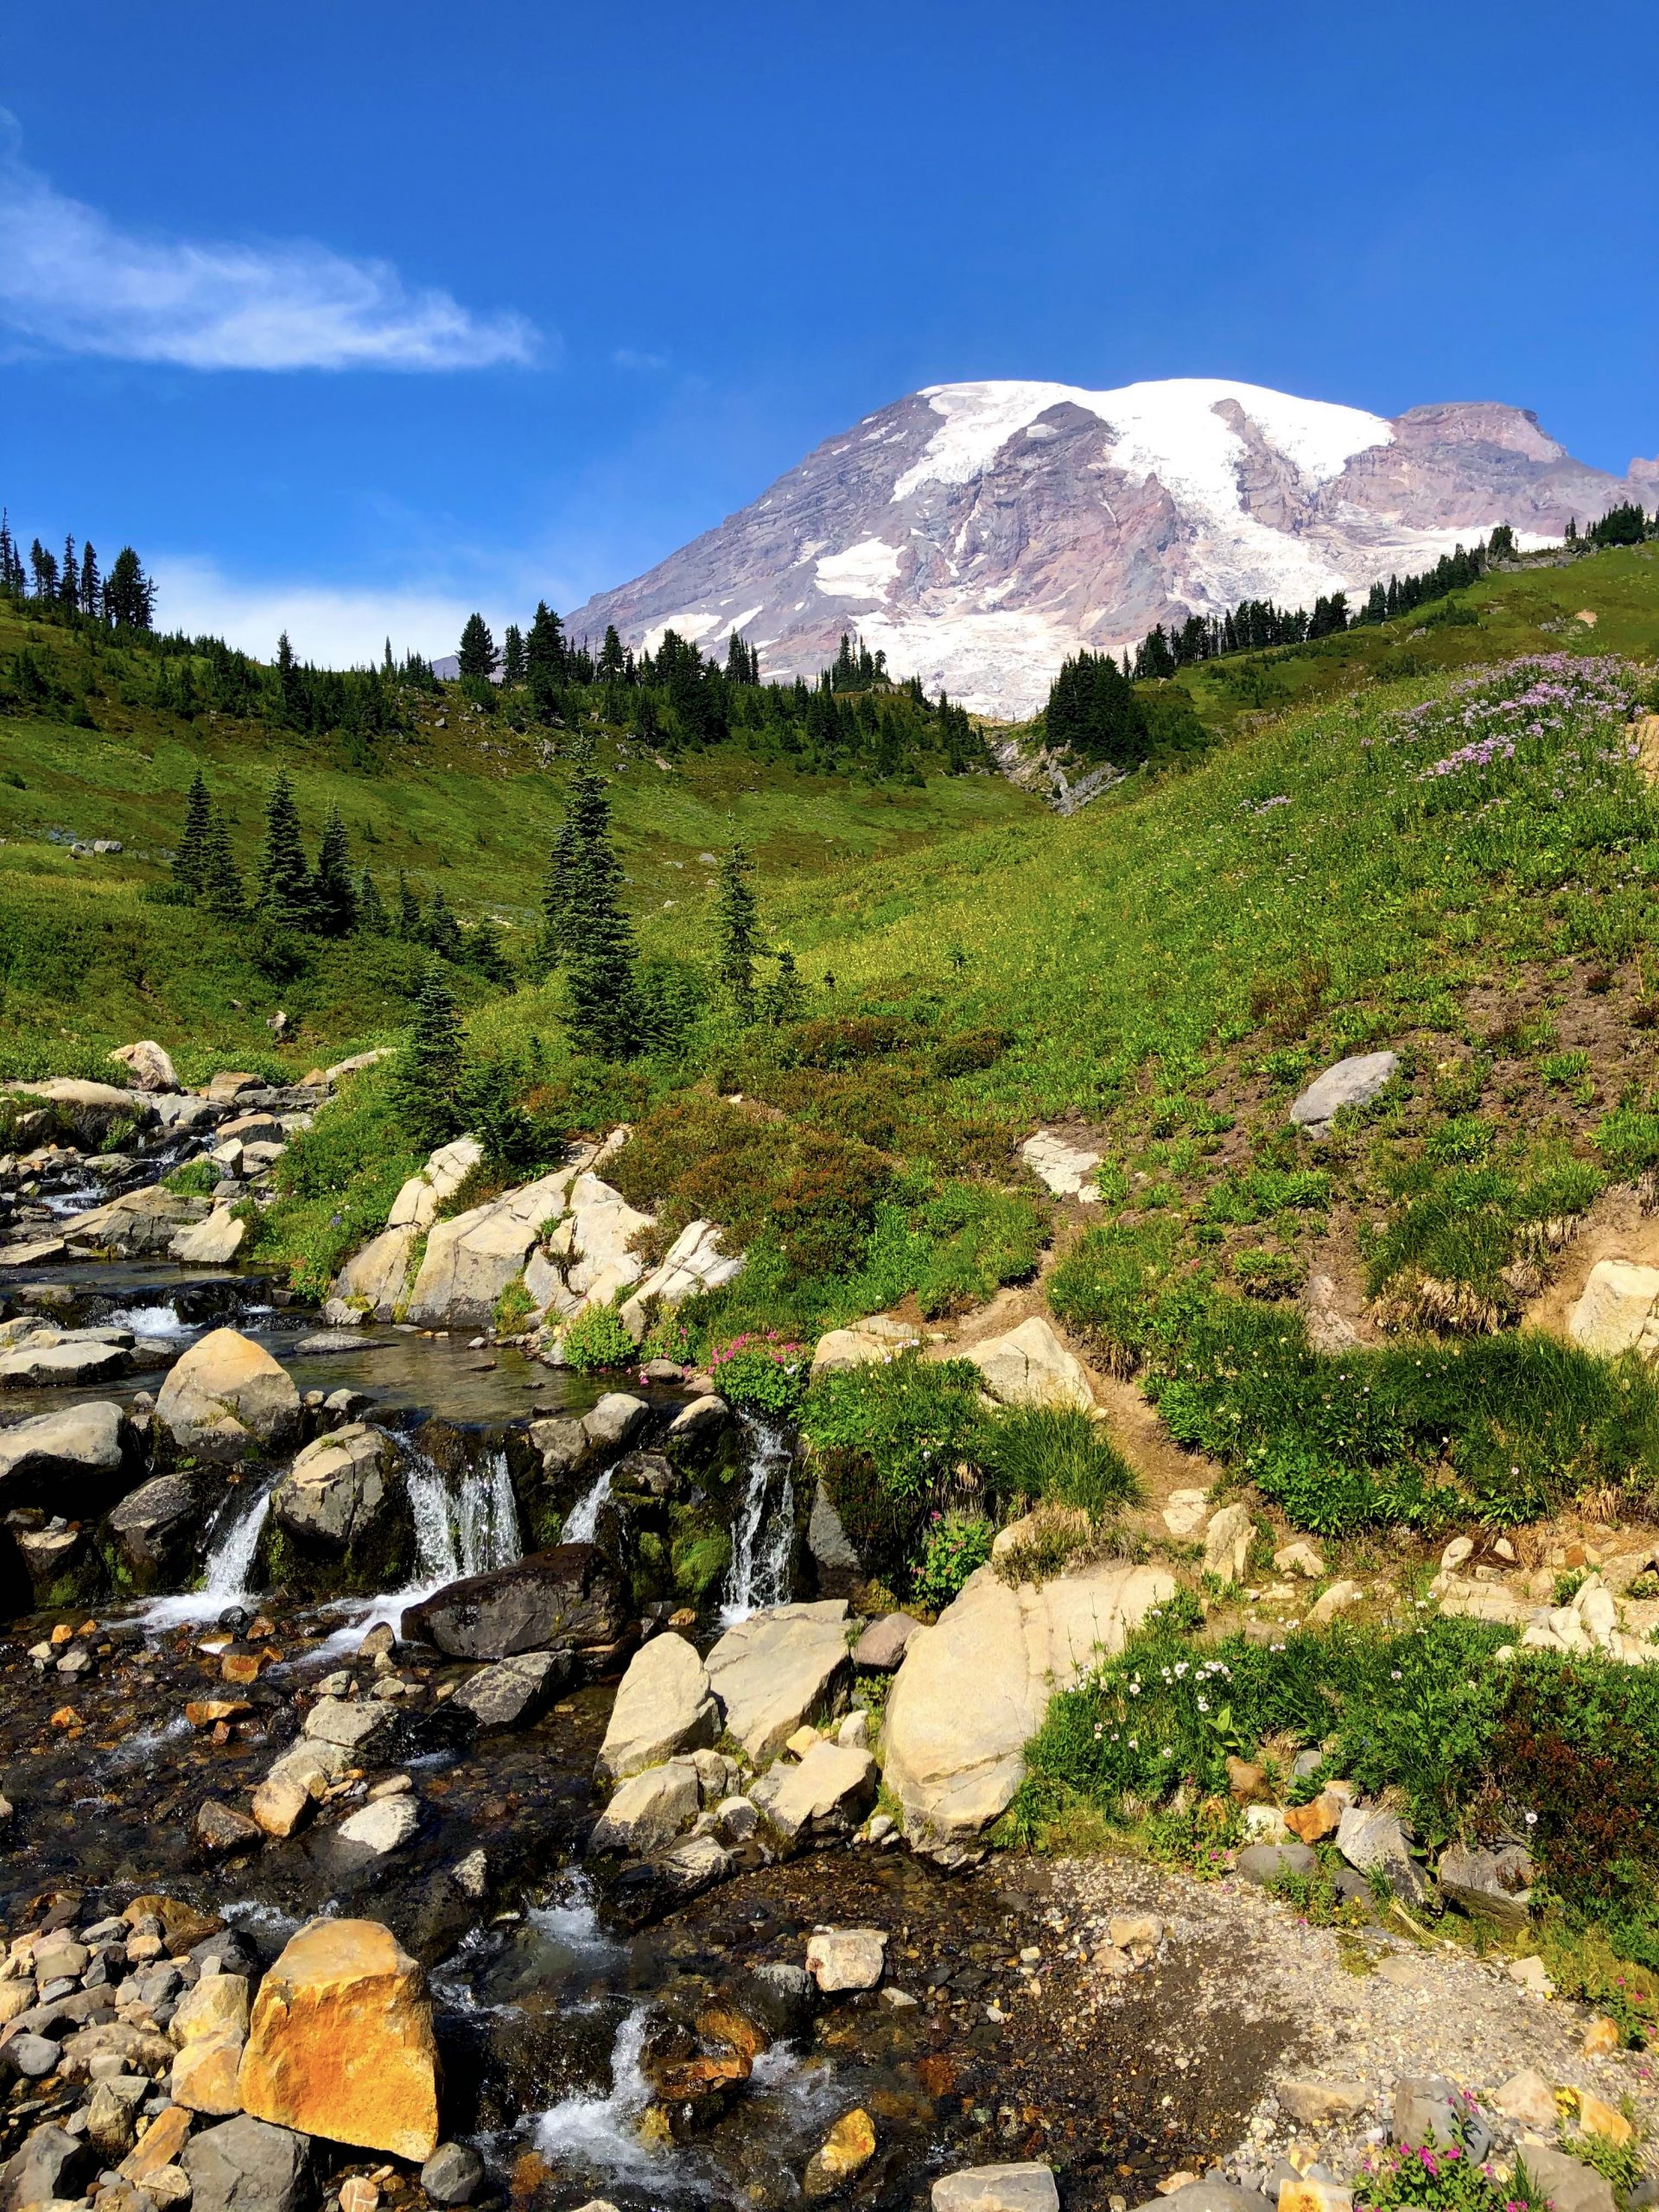 a photo of Myrtle Falls, a trickling stream near Paradise, WA. Mount Rainier looms in the background against a saturated blue sky. a lush valley separates the falls from the mountain. it's mostly green with a few flowers here and there.